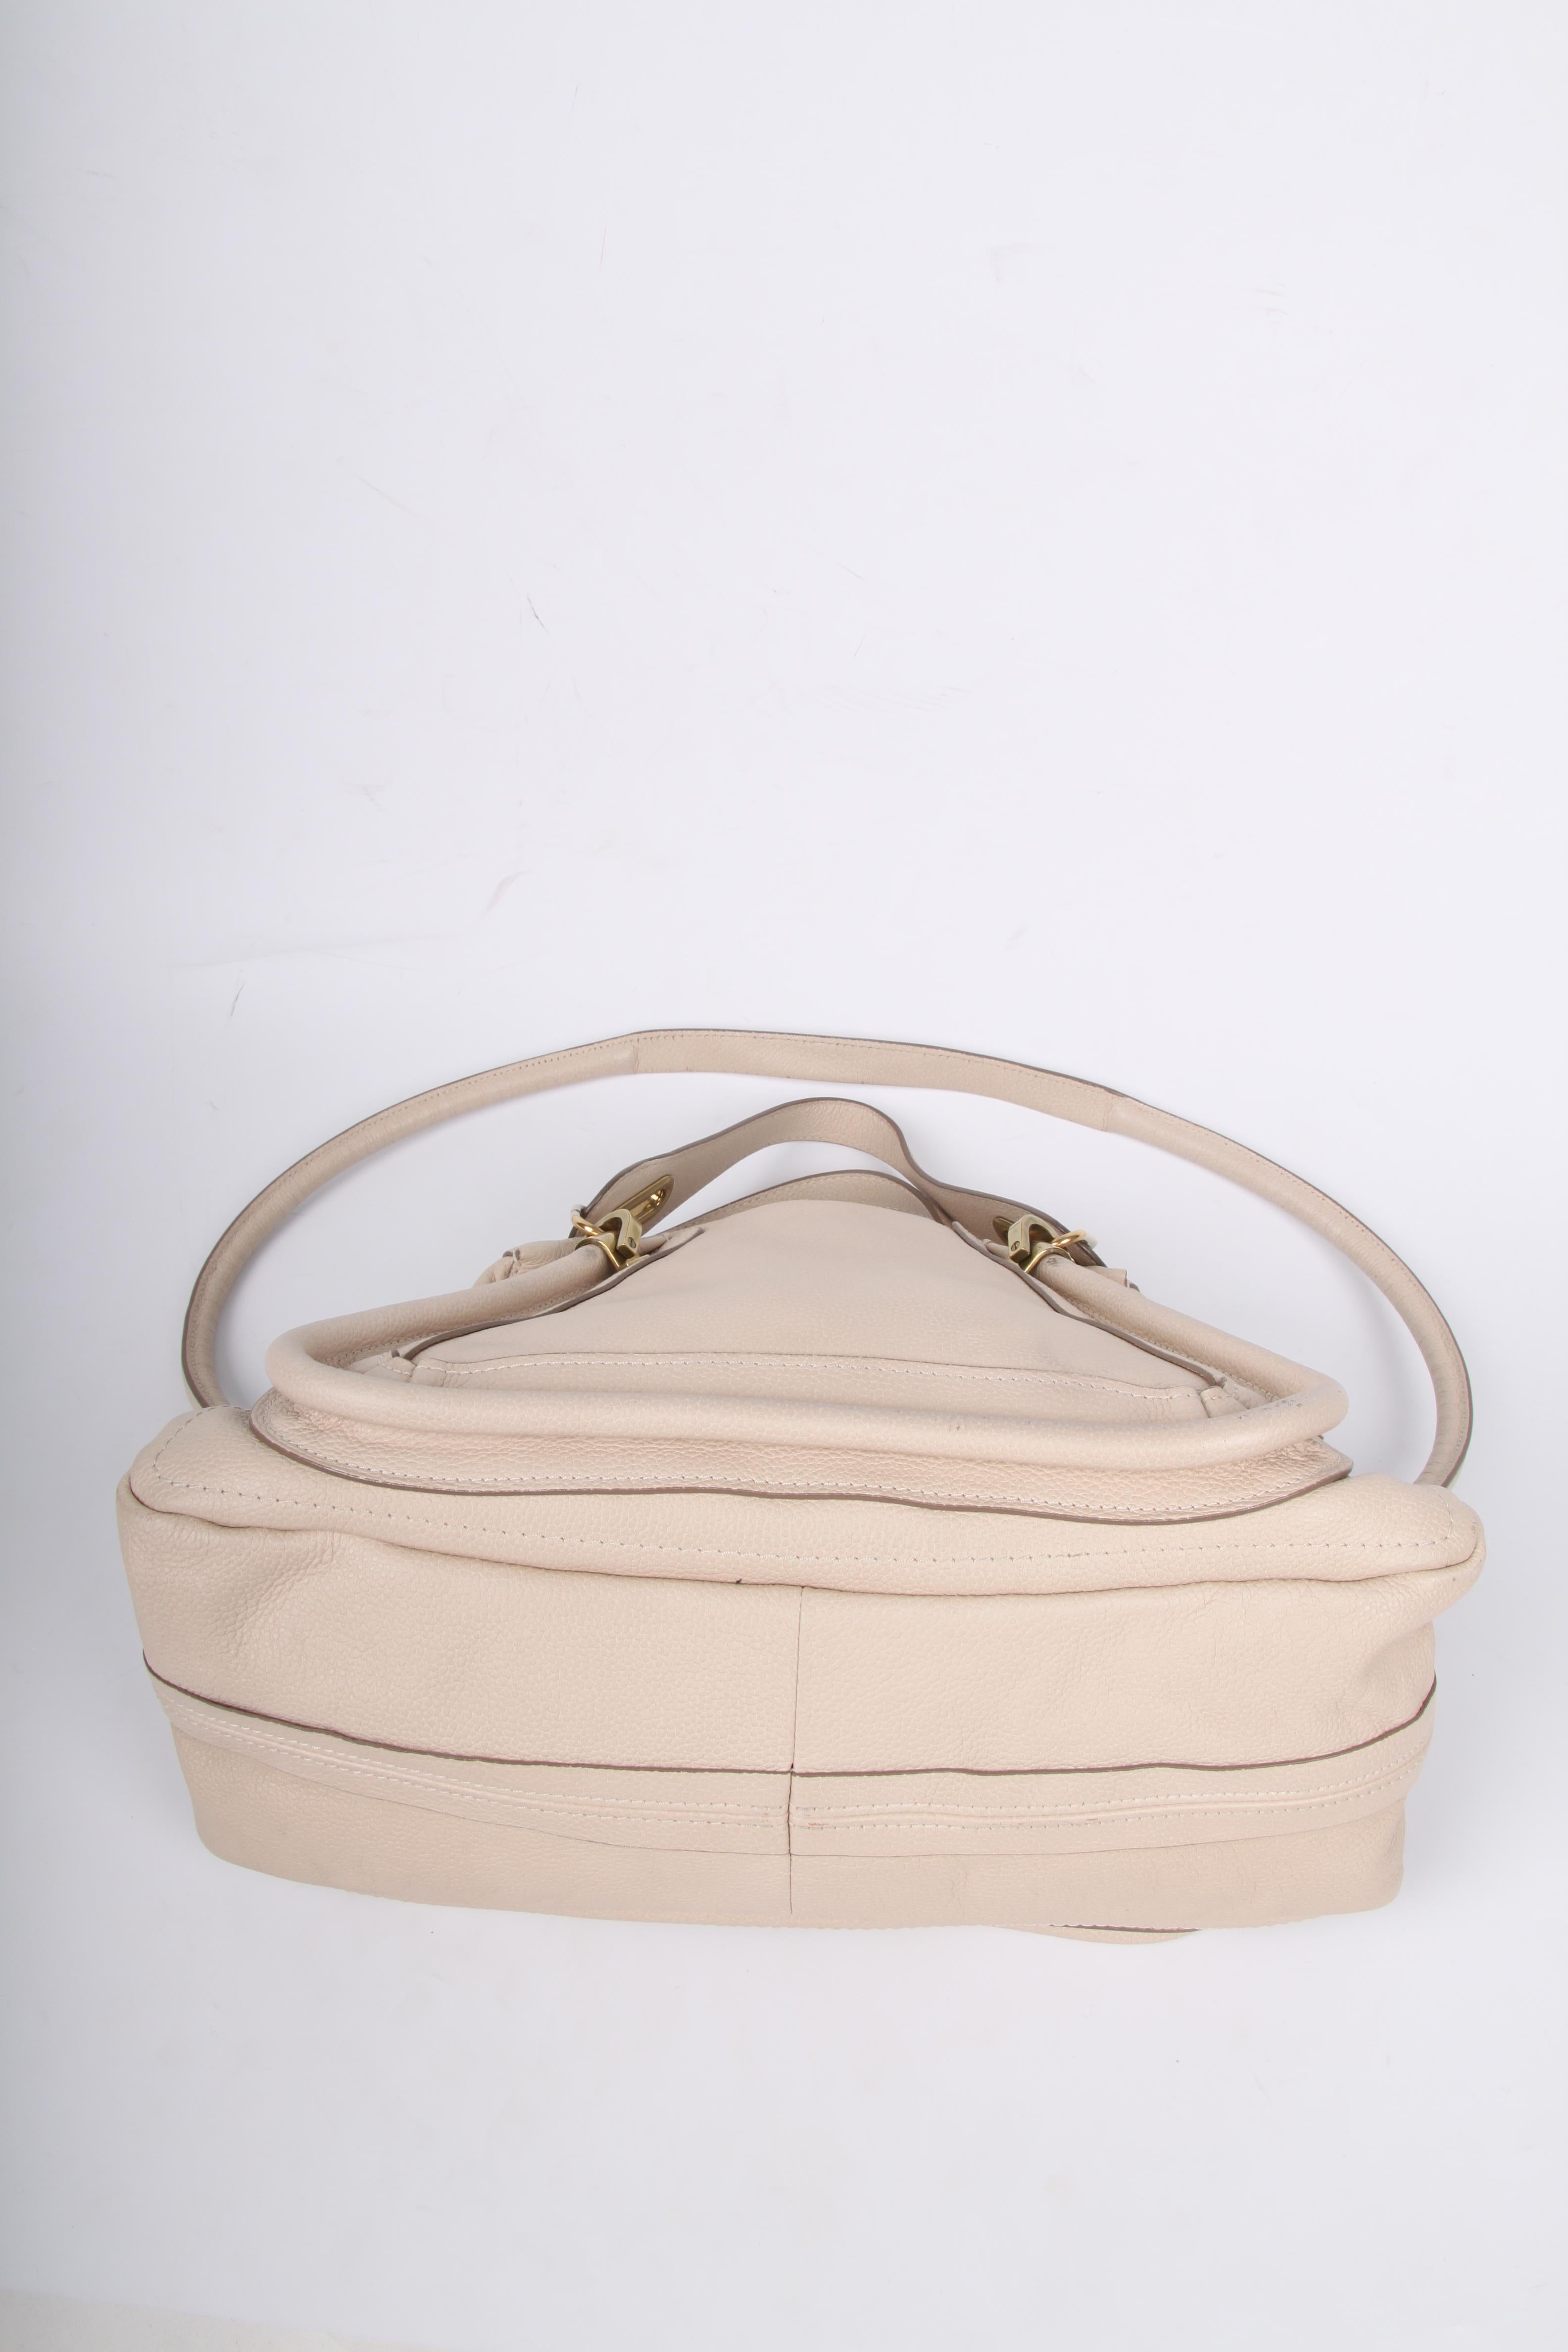 Chloé Paraty Bag in Husky White leather, this is certainly not a bright white tone.

Rather large size, gold-tone hardware, zip top closure. Two handles and a long shoulder strap.

grained calfskin leather
gold-tone hardware
side twist-lock